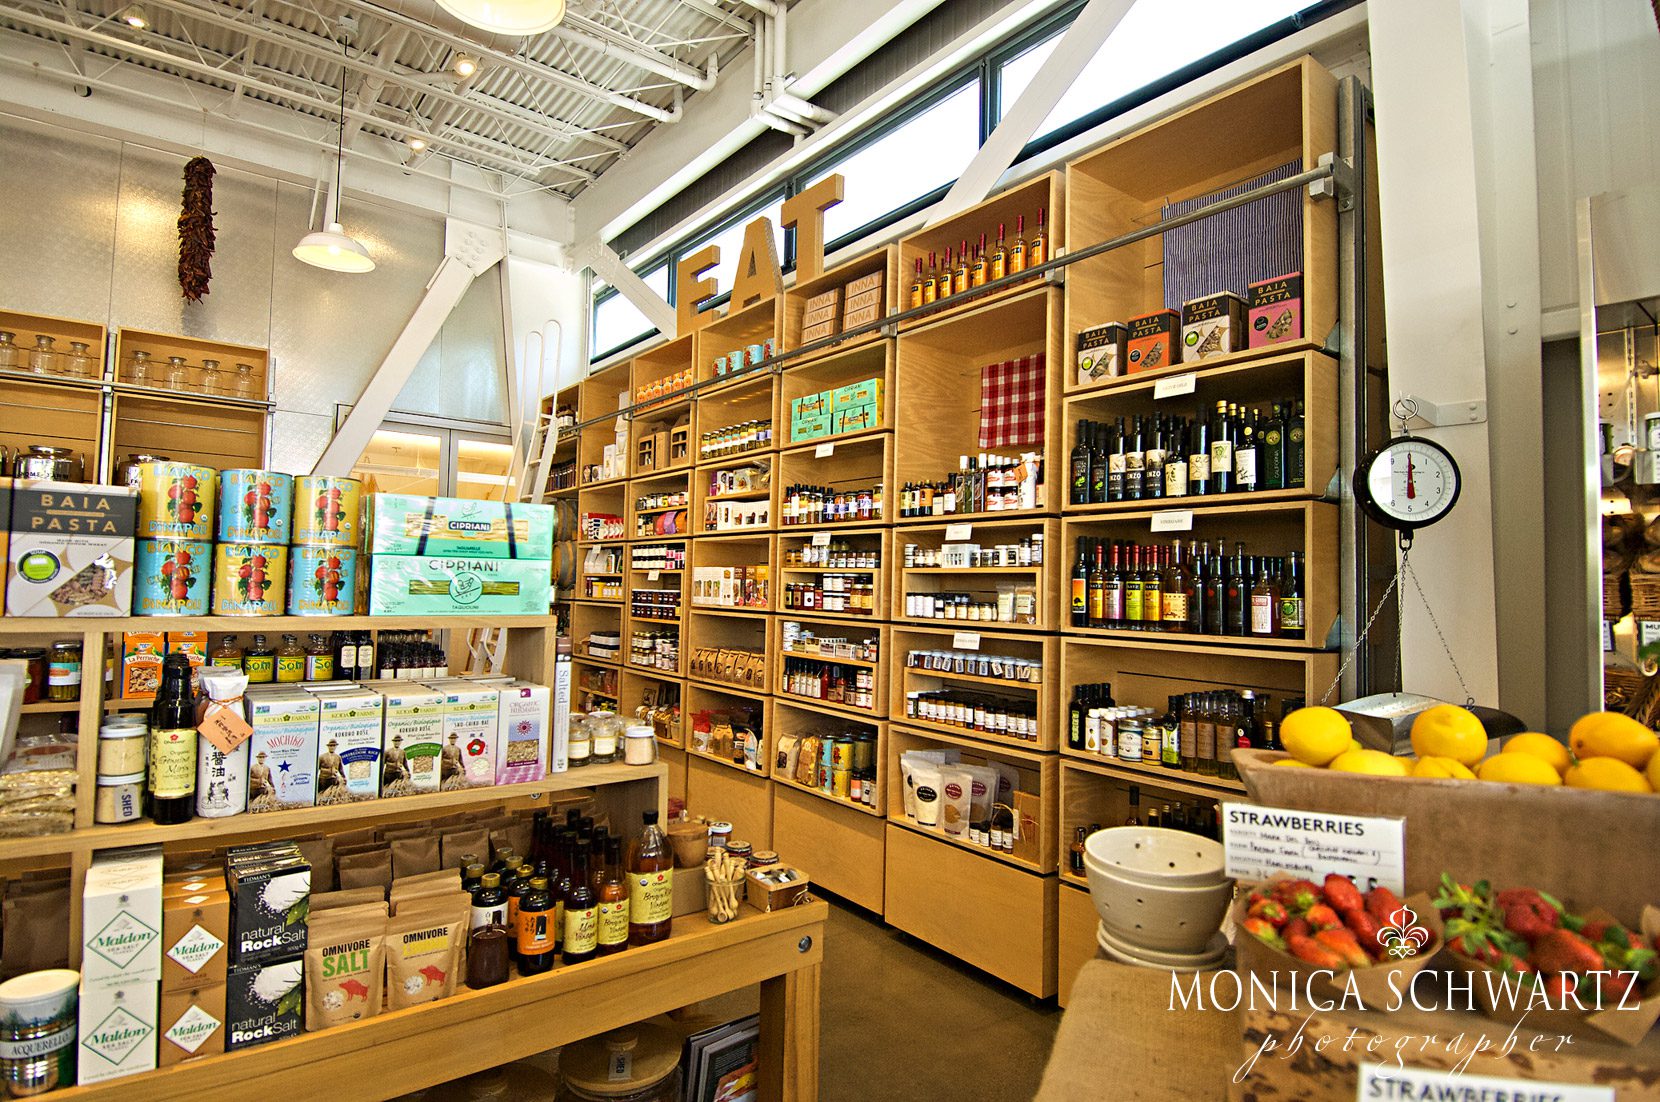 The-Shed-Cafe-Pantry-and-Shop-in-Healdsburg-California